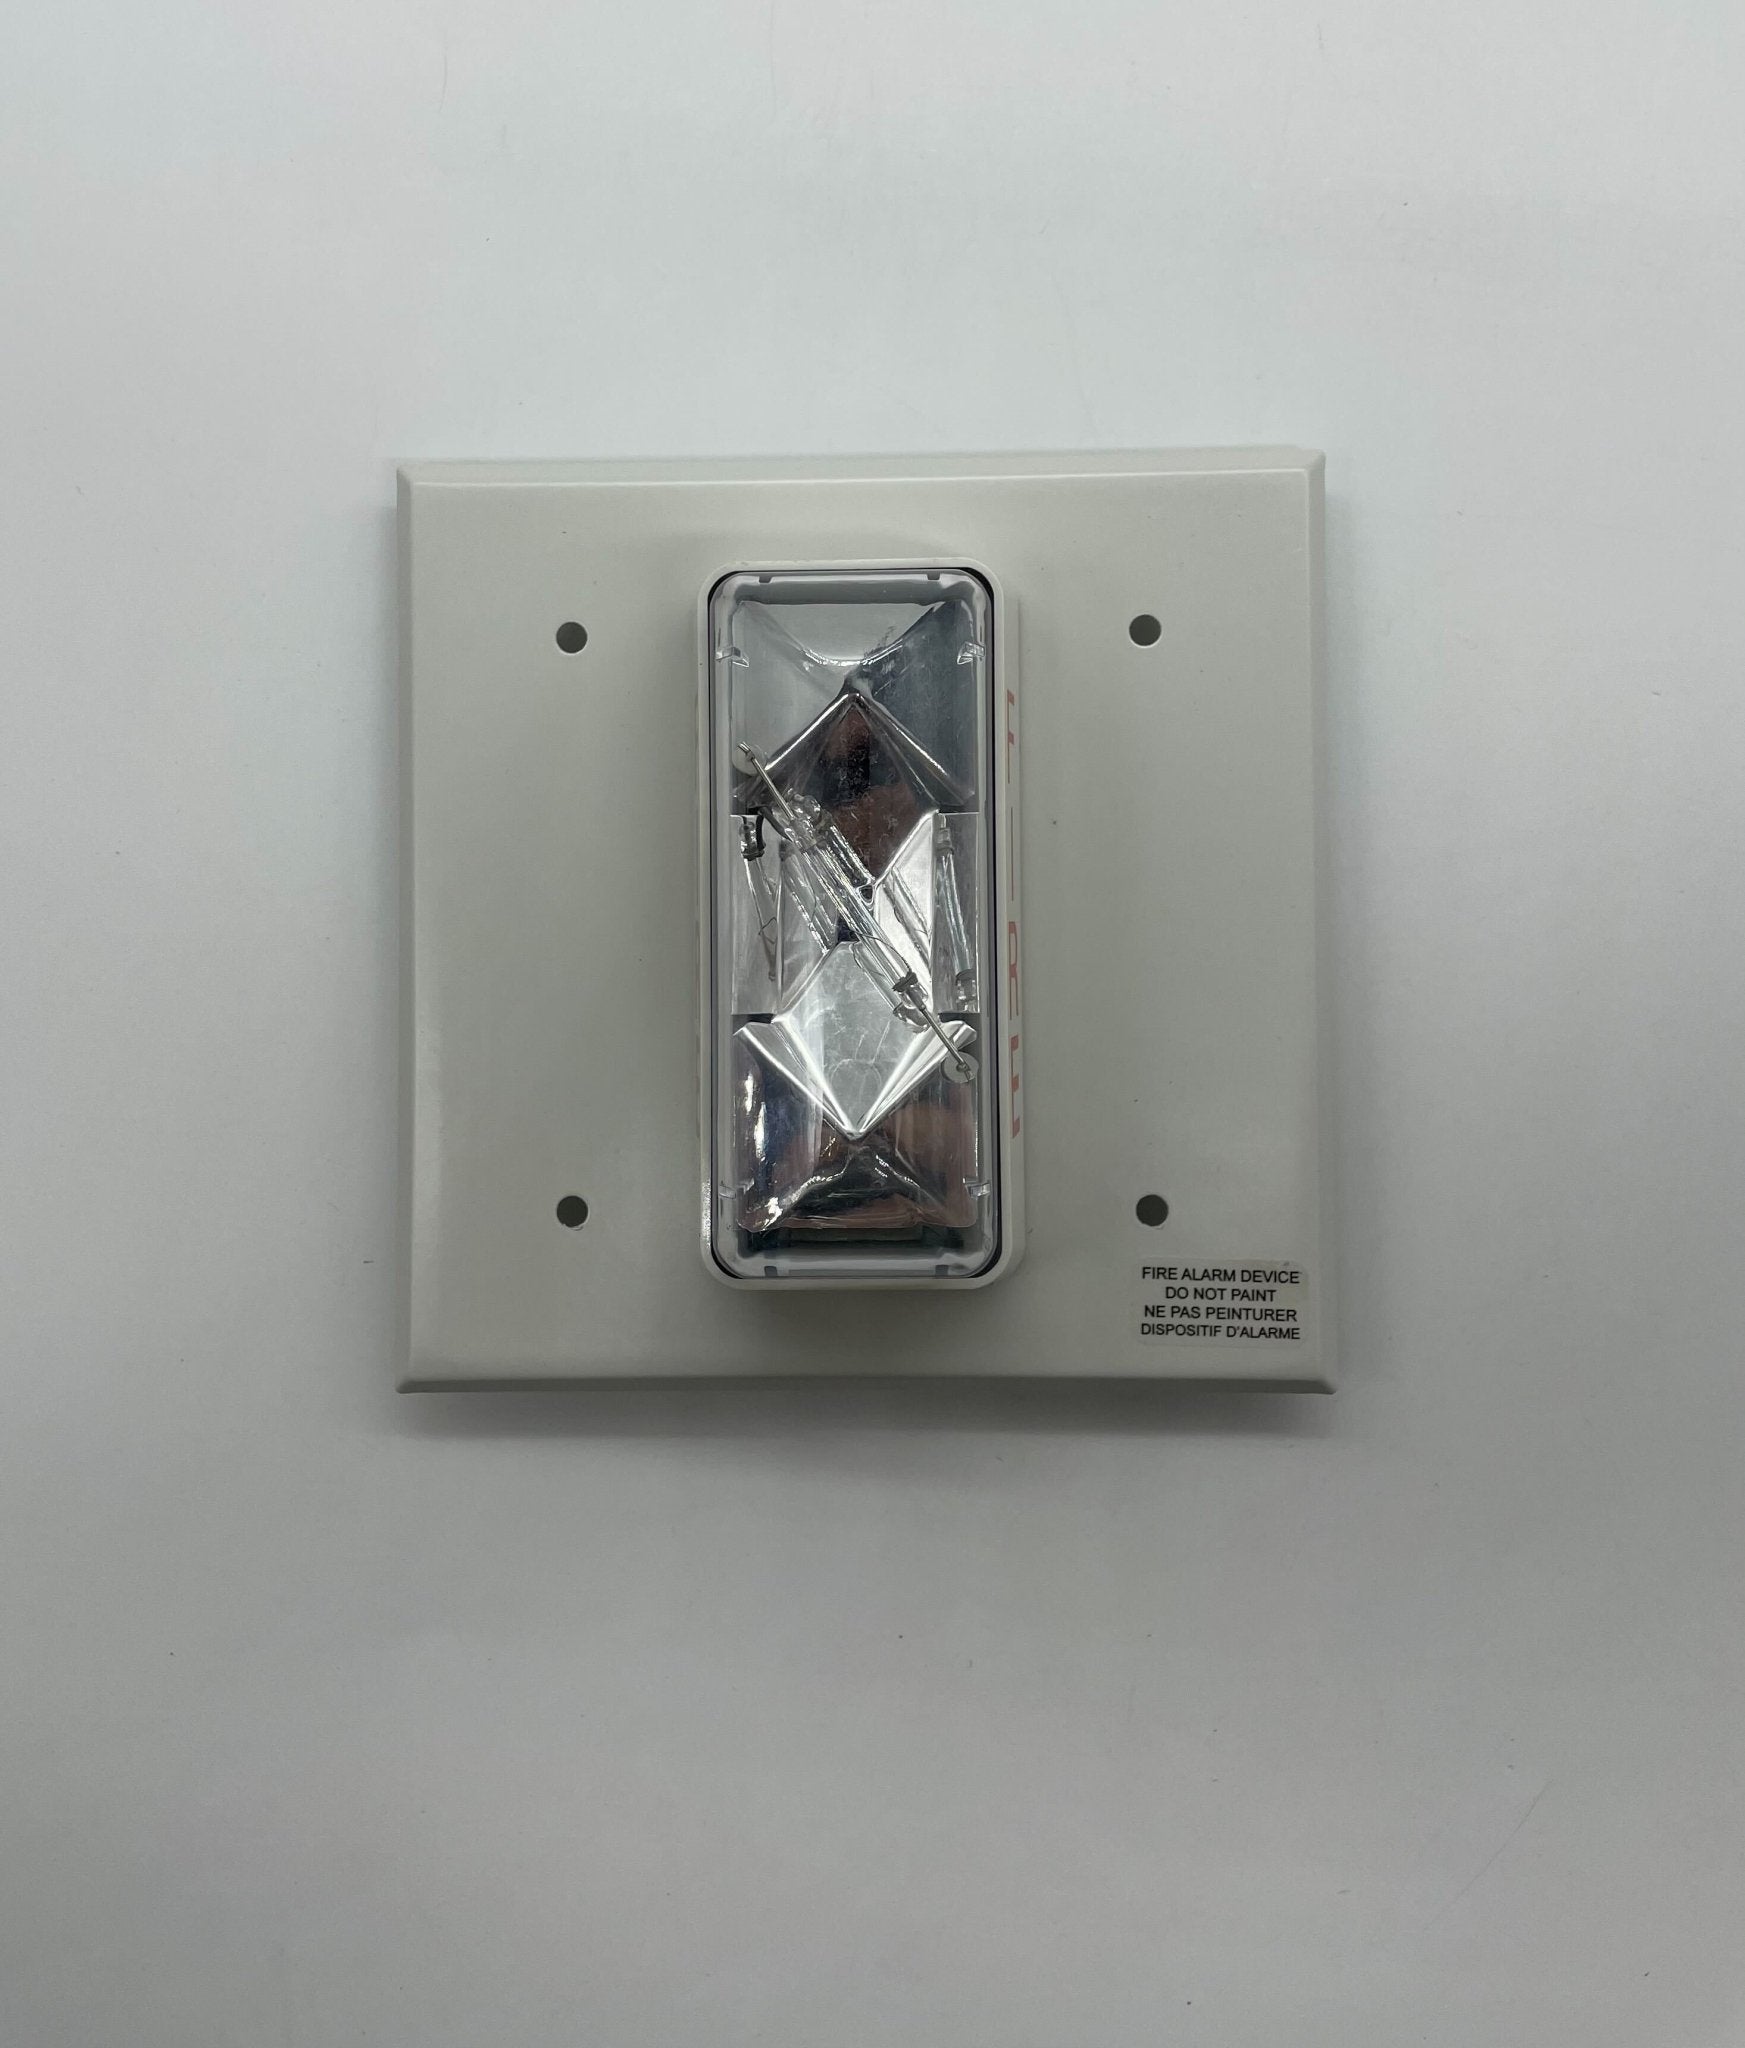 Edwards 405-7A-TW - The Fire Alarm Supplier